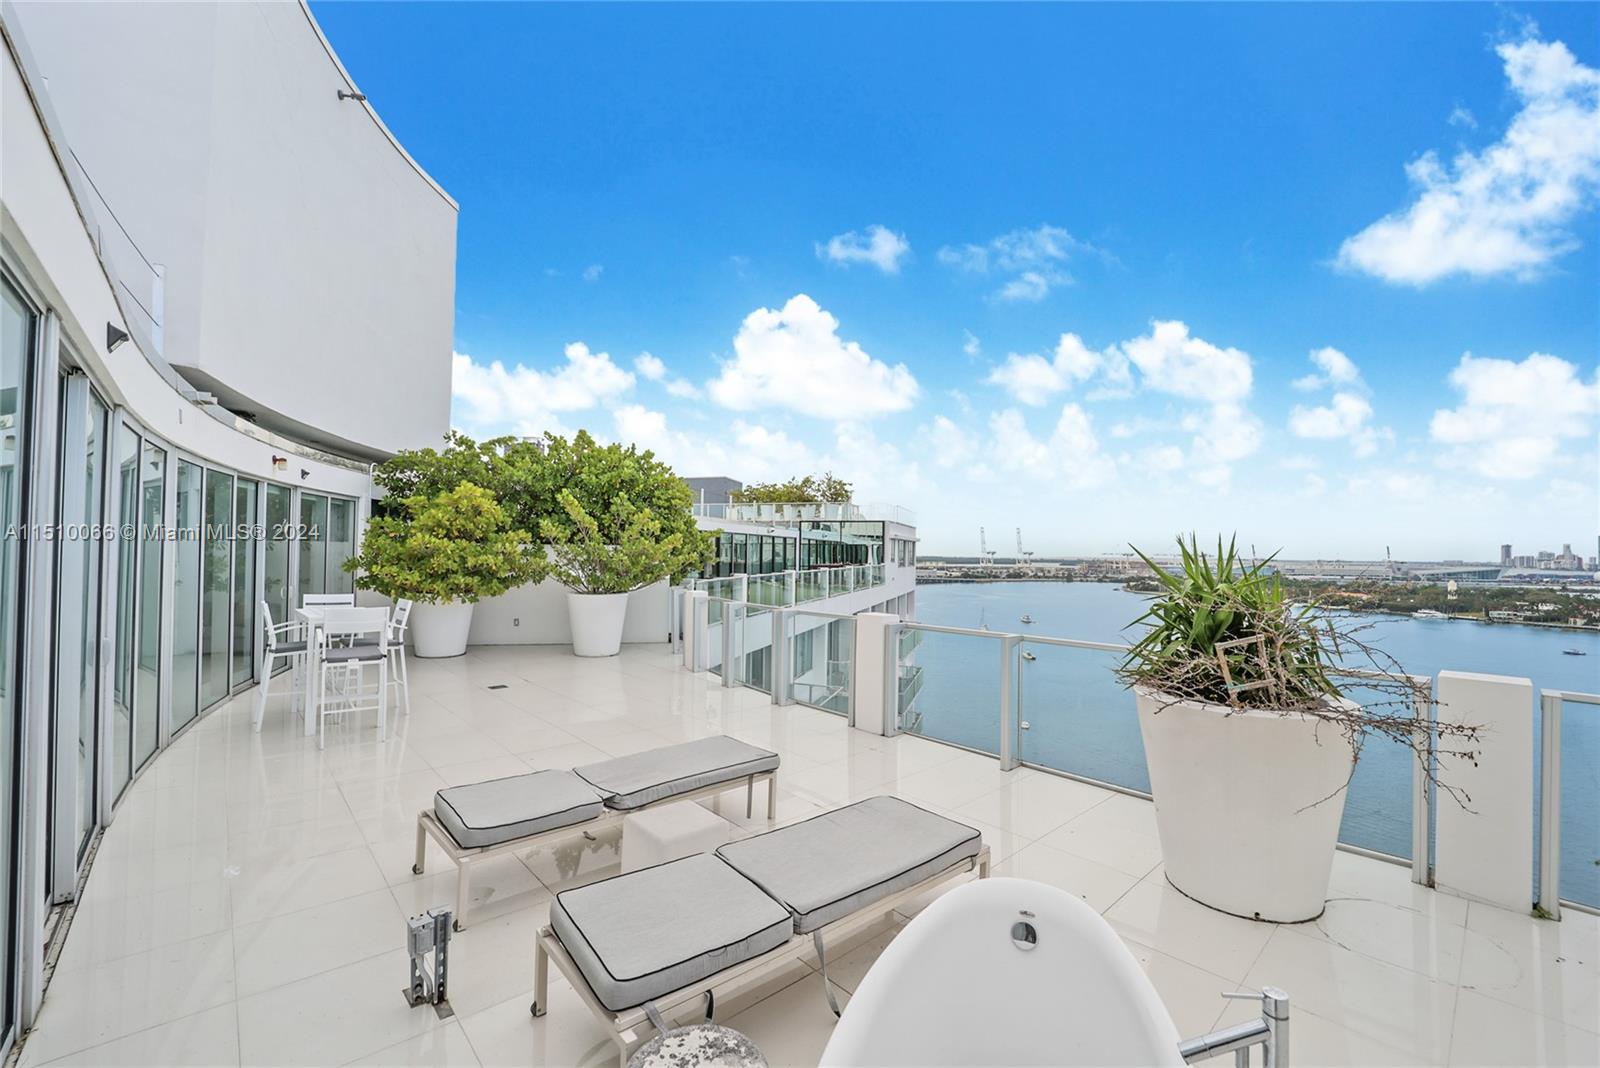 Showing April 18th from 12:00-4:00. Located at the luxurious Mondrian Hotel South Beach, this breathtaking penthouse has over 1,900 sq ft of interior living spaces and an 800 sq ft terrace overlooking Miami’s gorgeous skyline. Enjoy scenic sunset views throughout the entire unit as this penthouse is perfect for entertaining or enjoying the breathtaking bay view every evening. This lavish unit is equipped with 2 bedrooms, 2.5 bathrooms, and a spacious modern kitchen. At the Mondrian Hotel, you will have a condo hotel program and no rental restrictions on the building. Additional amenities include a restaurant, bar, two swimming pools, gym, aqua spa, valet service, and room service.